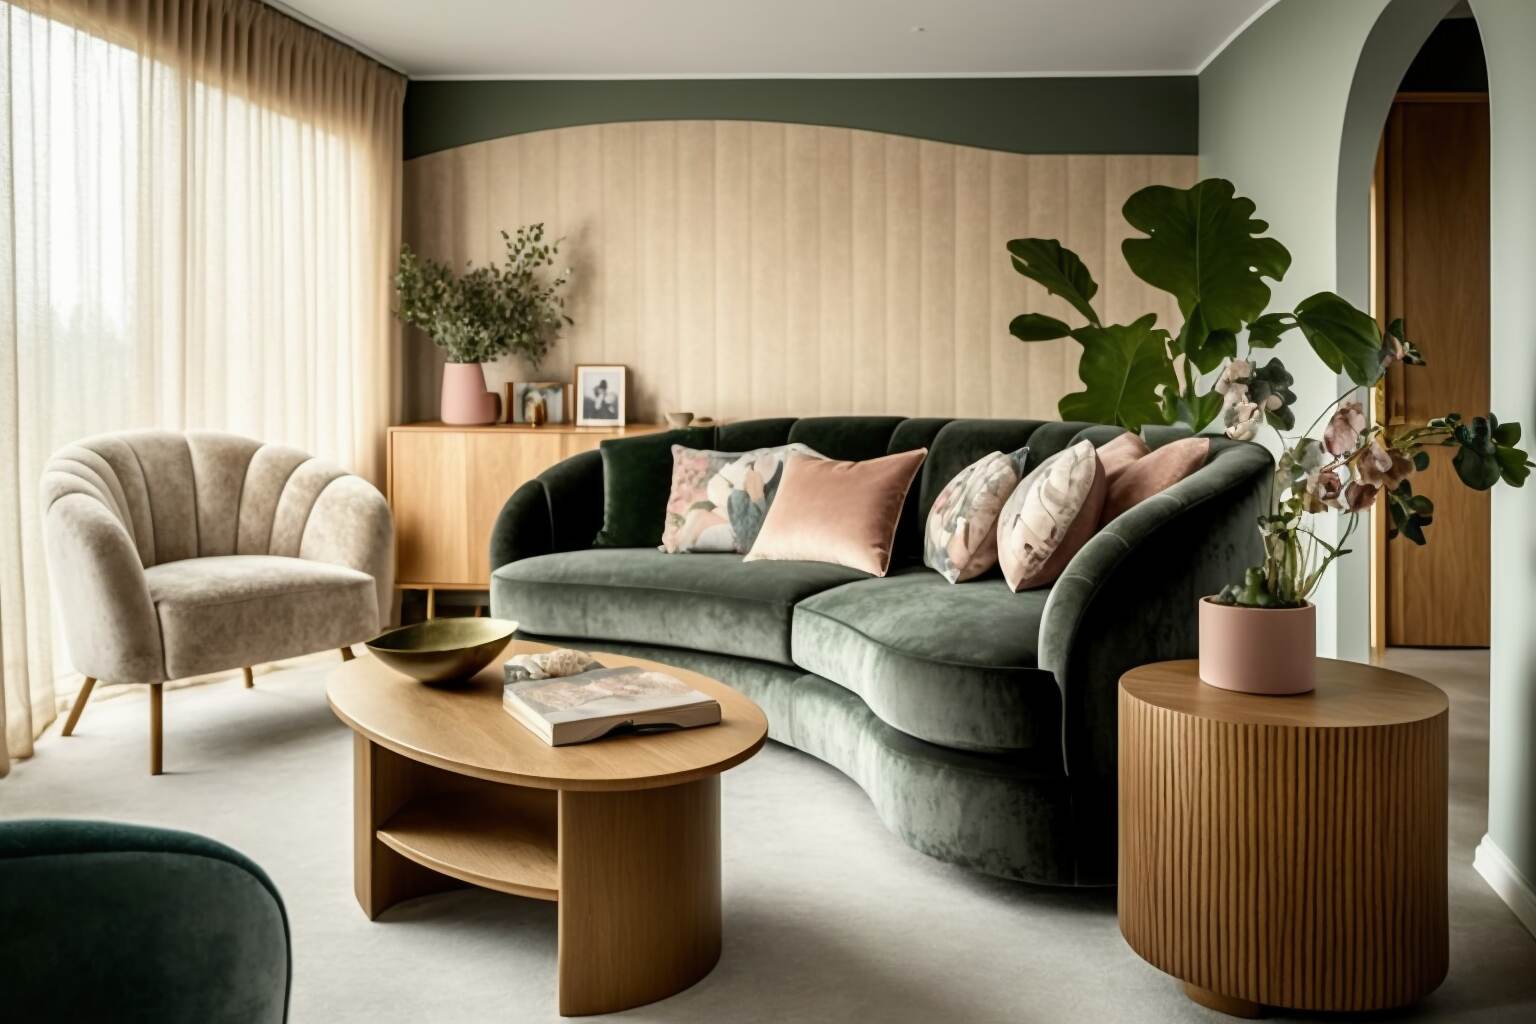 A Living Room With Curved Furniture Including A Rounded Sofa And Coffee Table